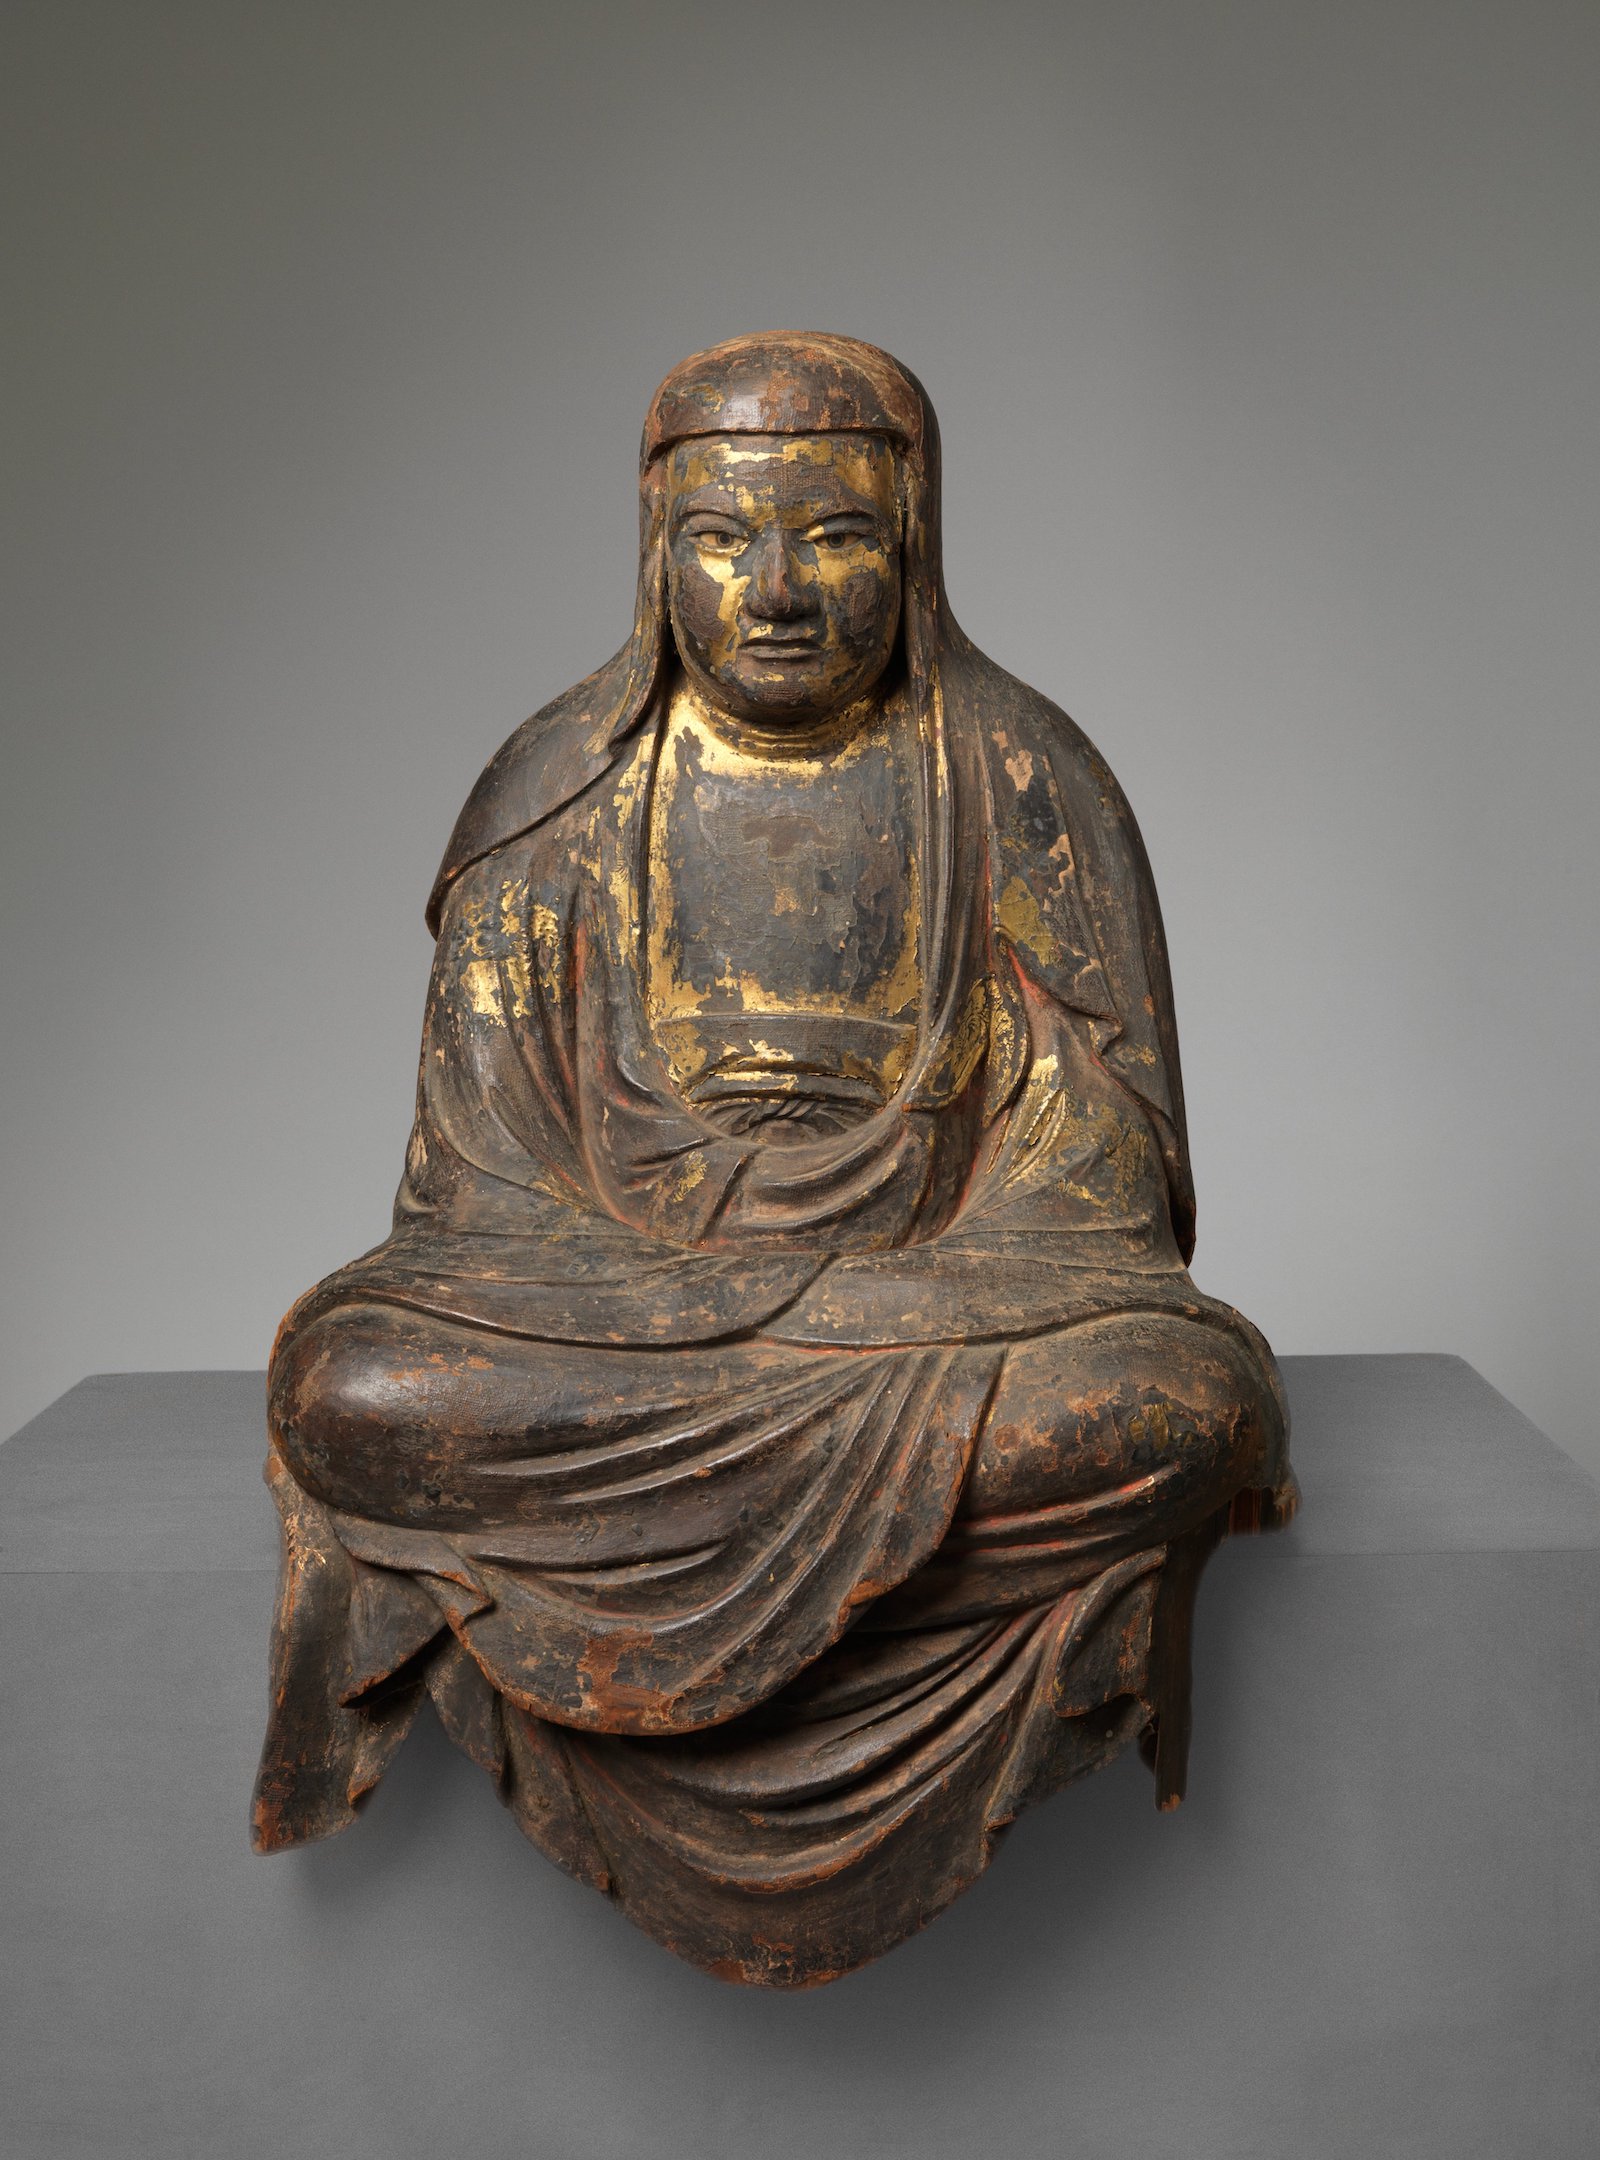 A Japanese statue of Bodhidharma, an influential figure in Zen Buddhism, c. 14th century. Minneapolis Institute of Art. Mary Griggs Burke Collection, Gift of the Mary and Jackson Burke Foundation. Public Domain.